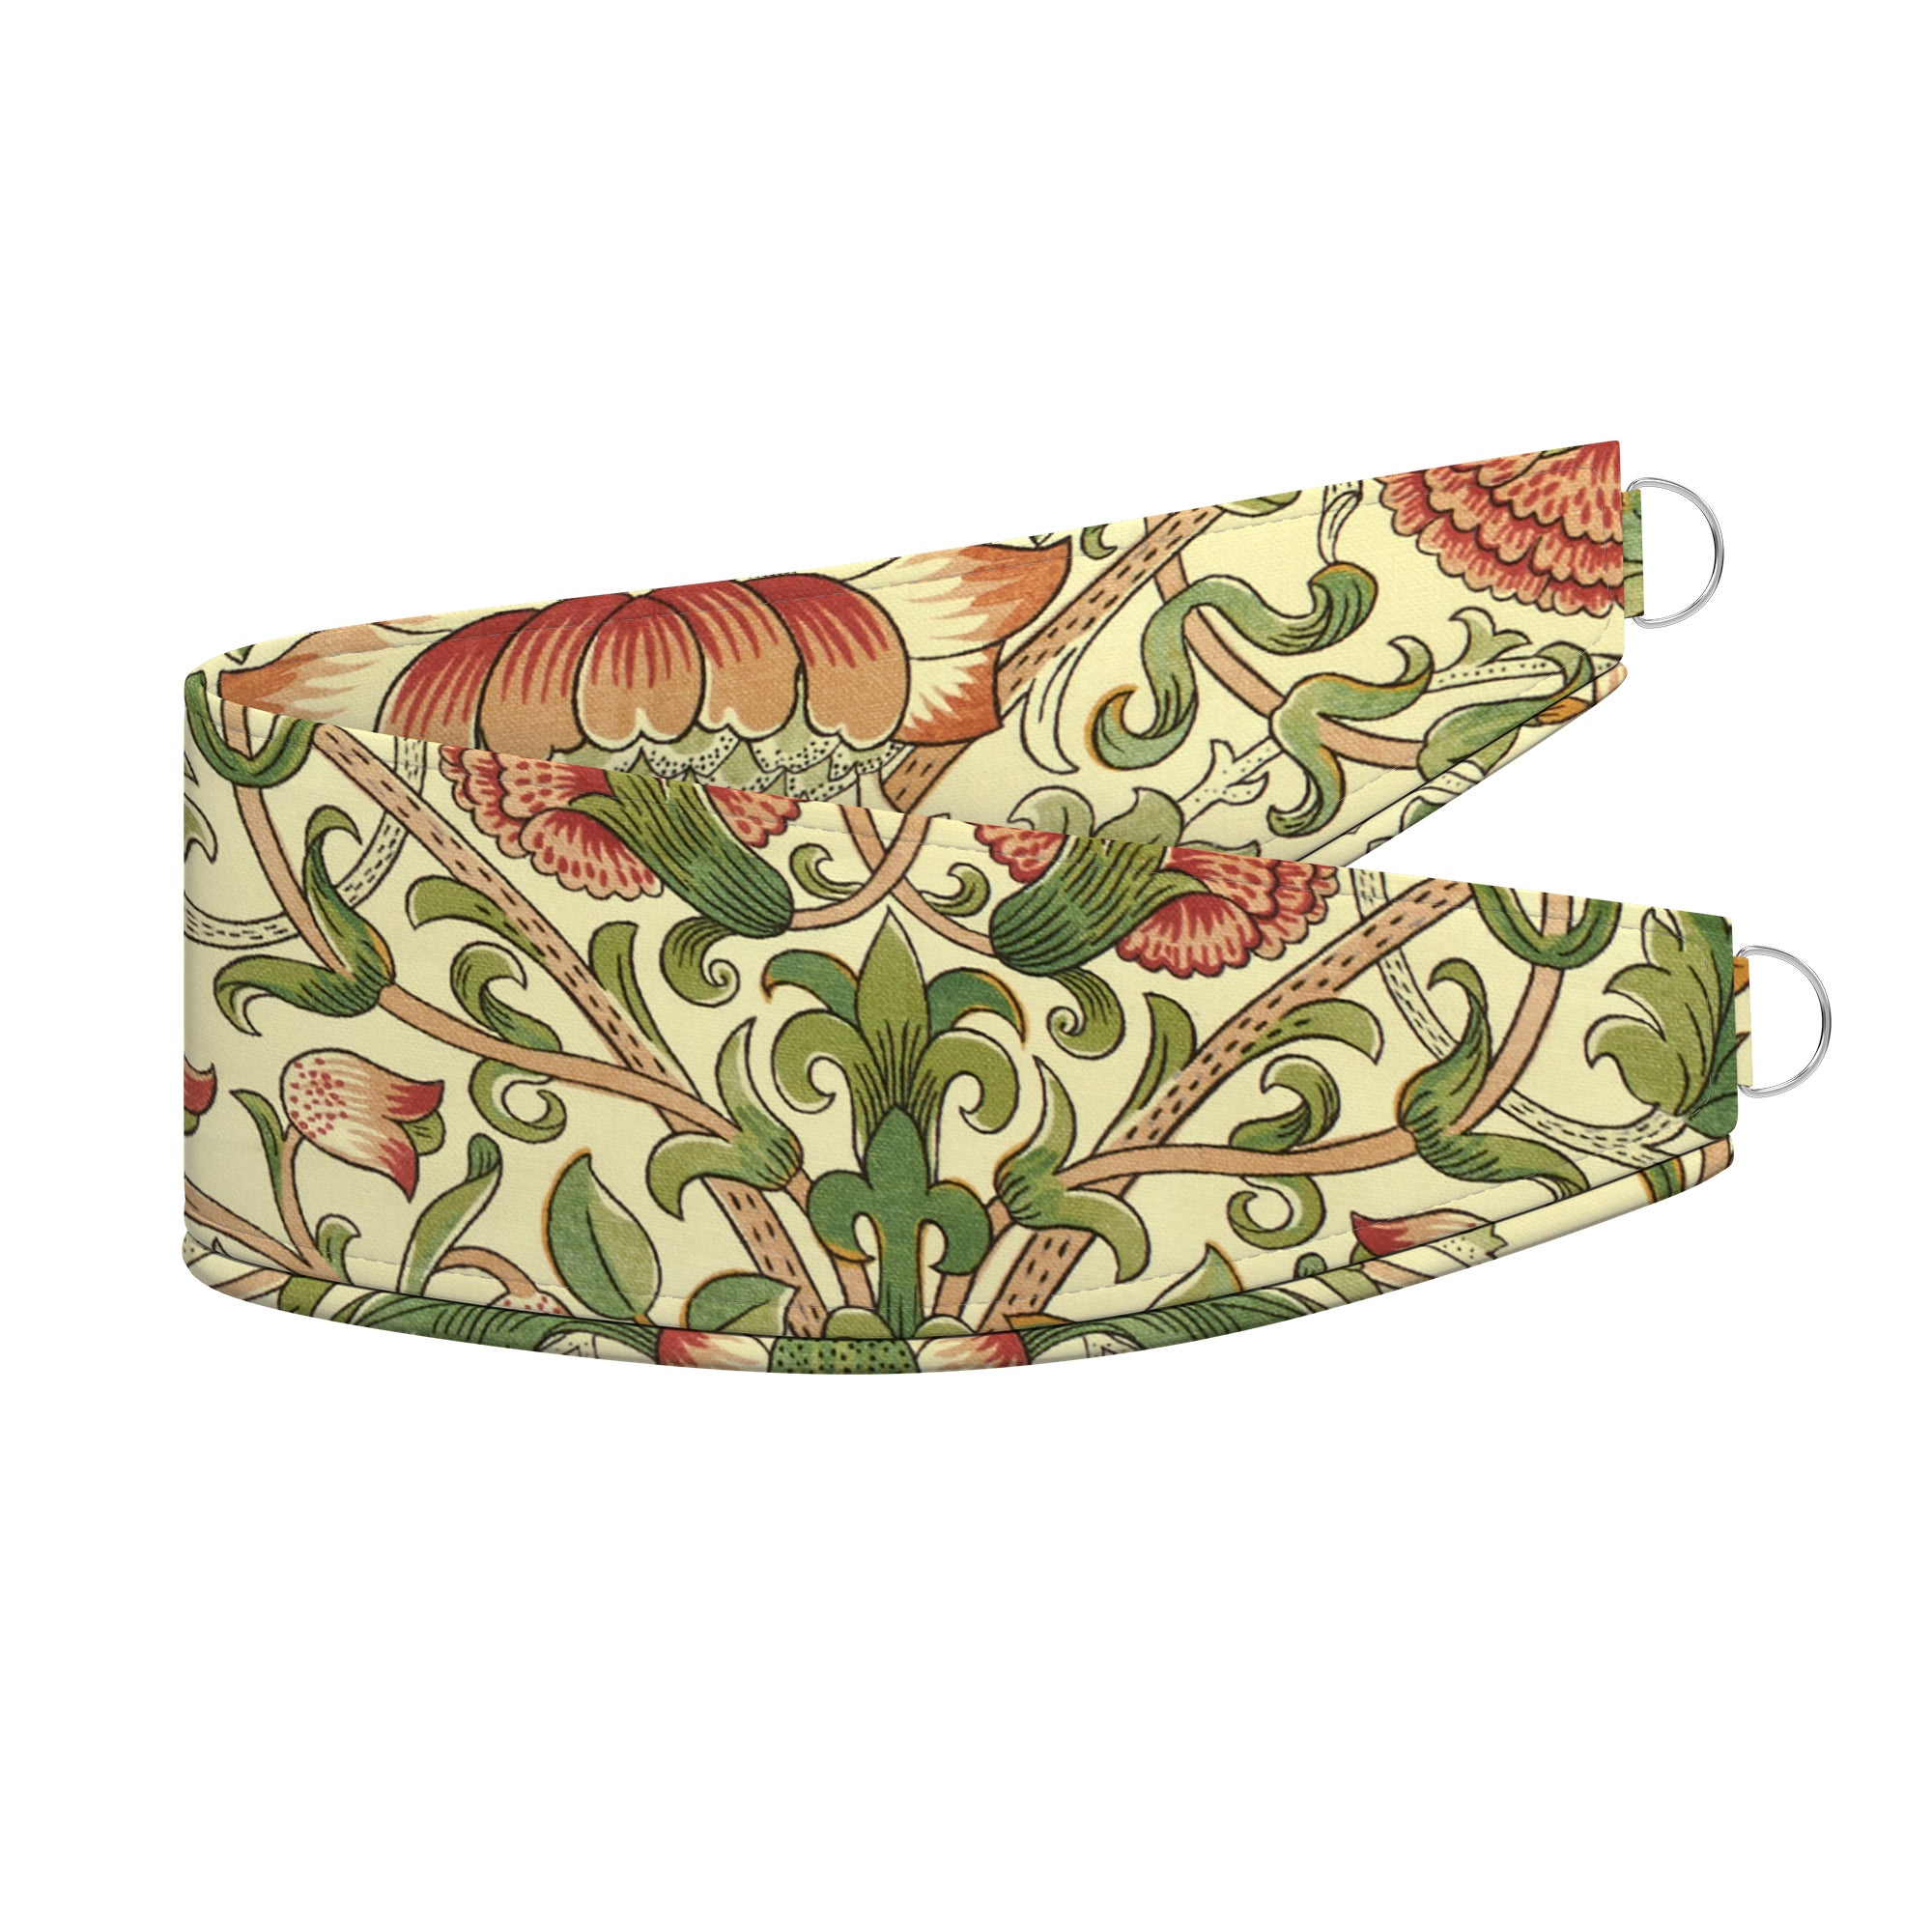 William Morris At Home Lodden Made To Order Tieback Lodden Strawberry